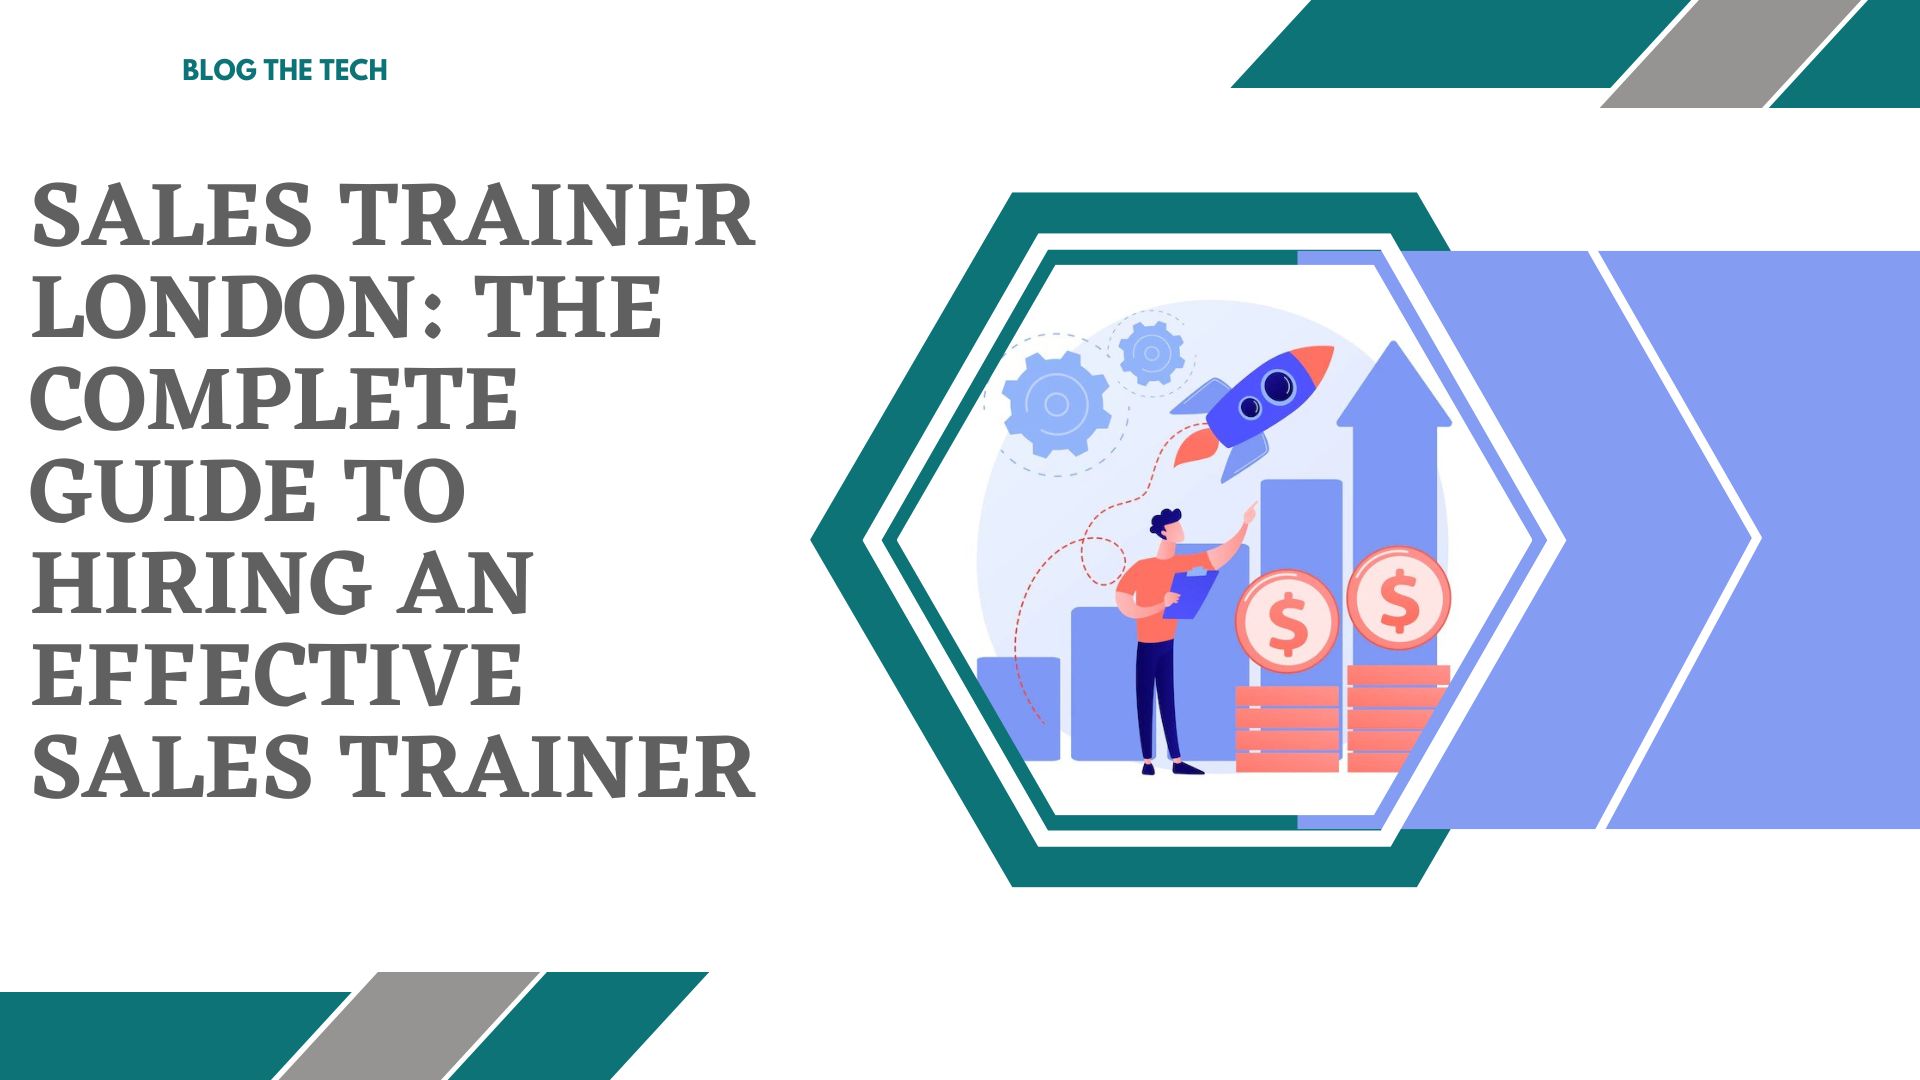 Sales Trainer London: The Complete Guide To Hiring An Effective Sales Trainer